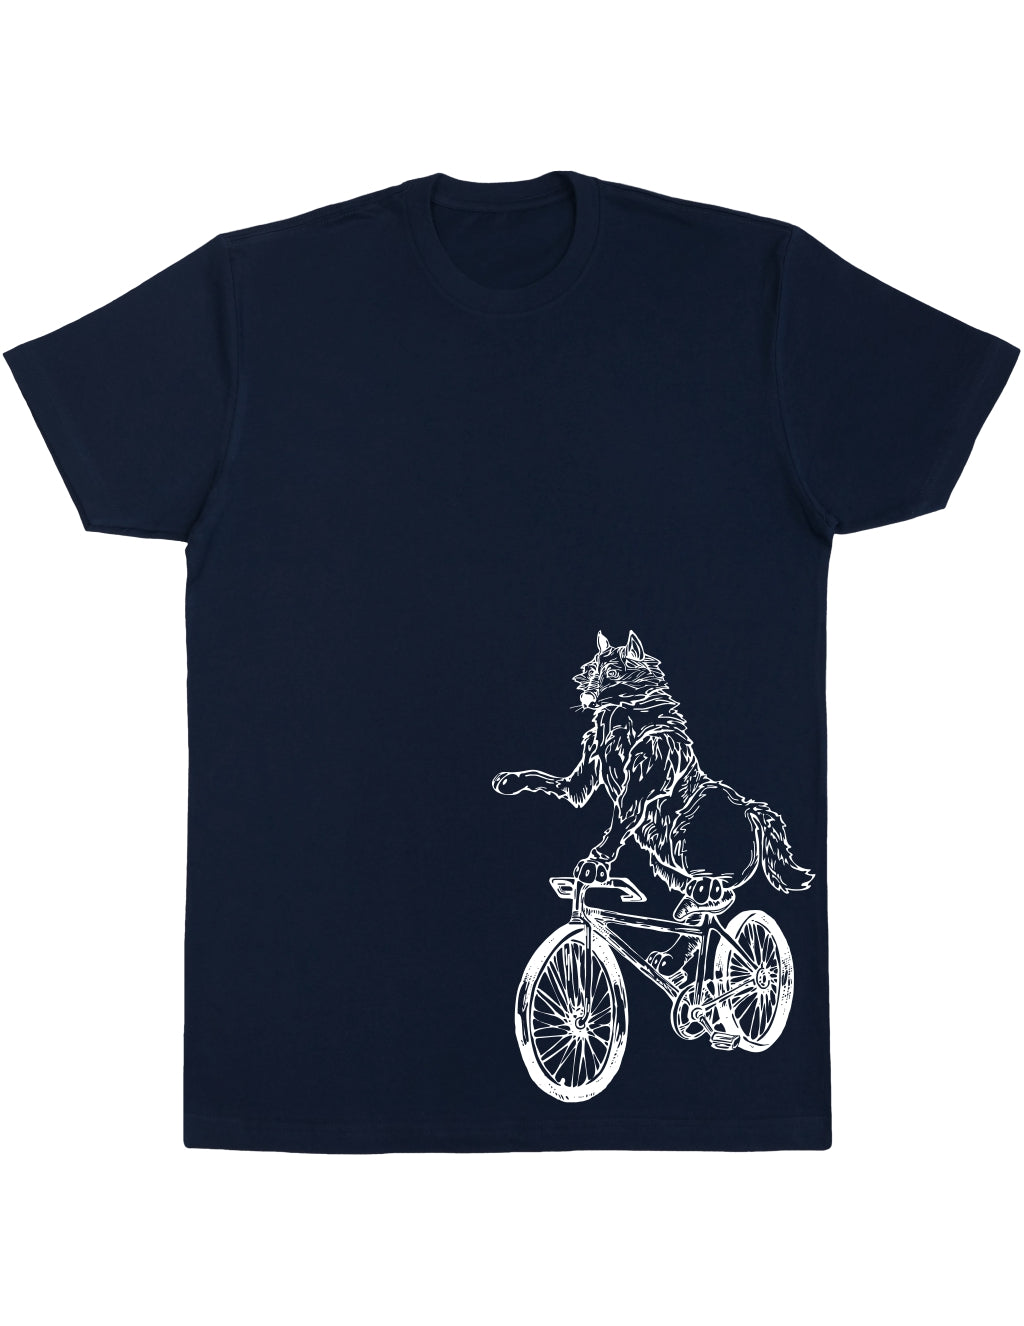 SEEMBO Wolf Cycling Bicycle Men's Cotton T-Shirt Side Print